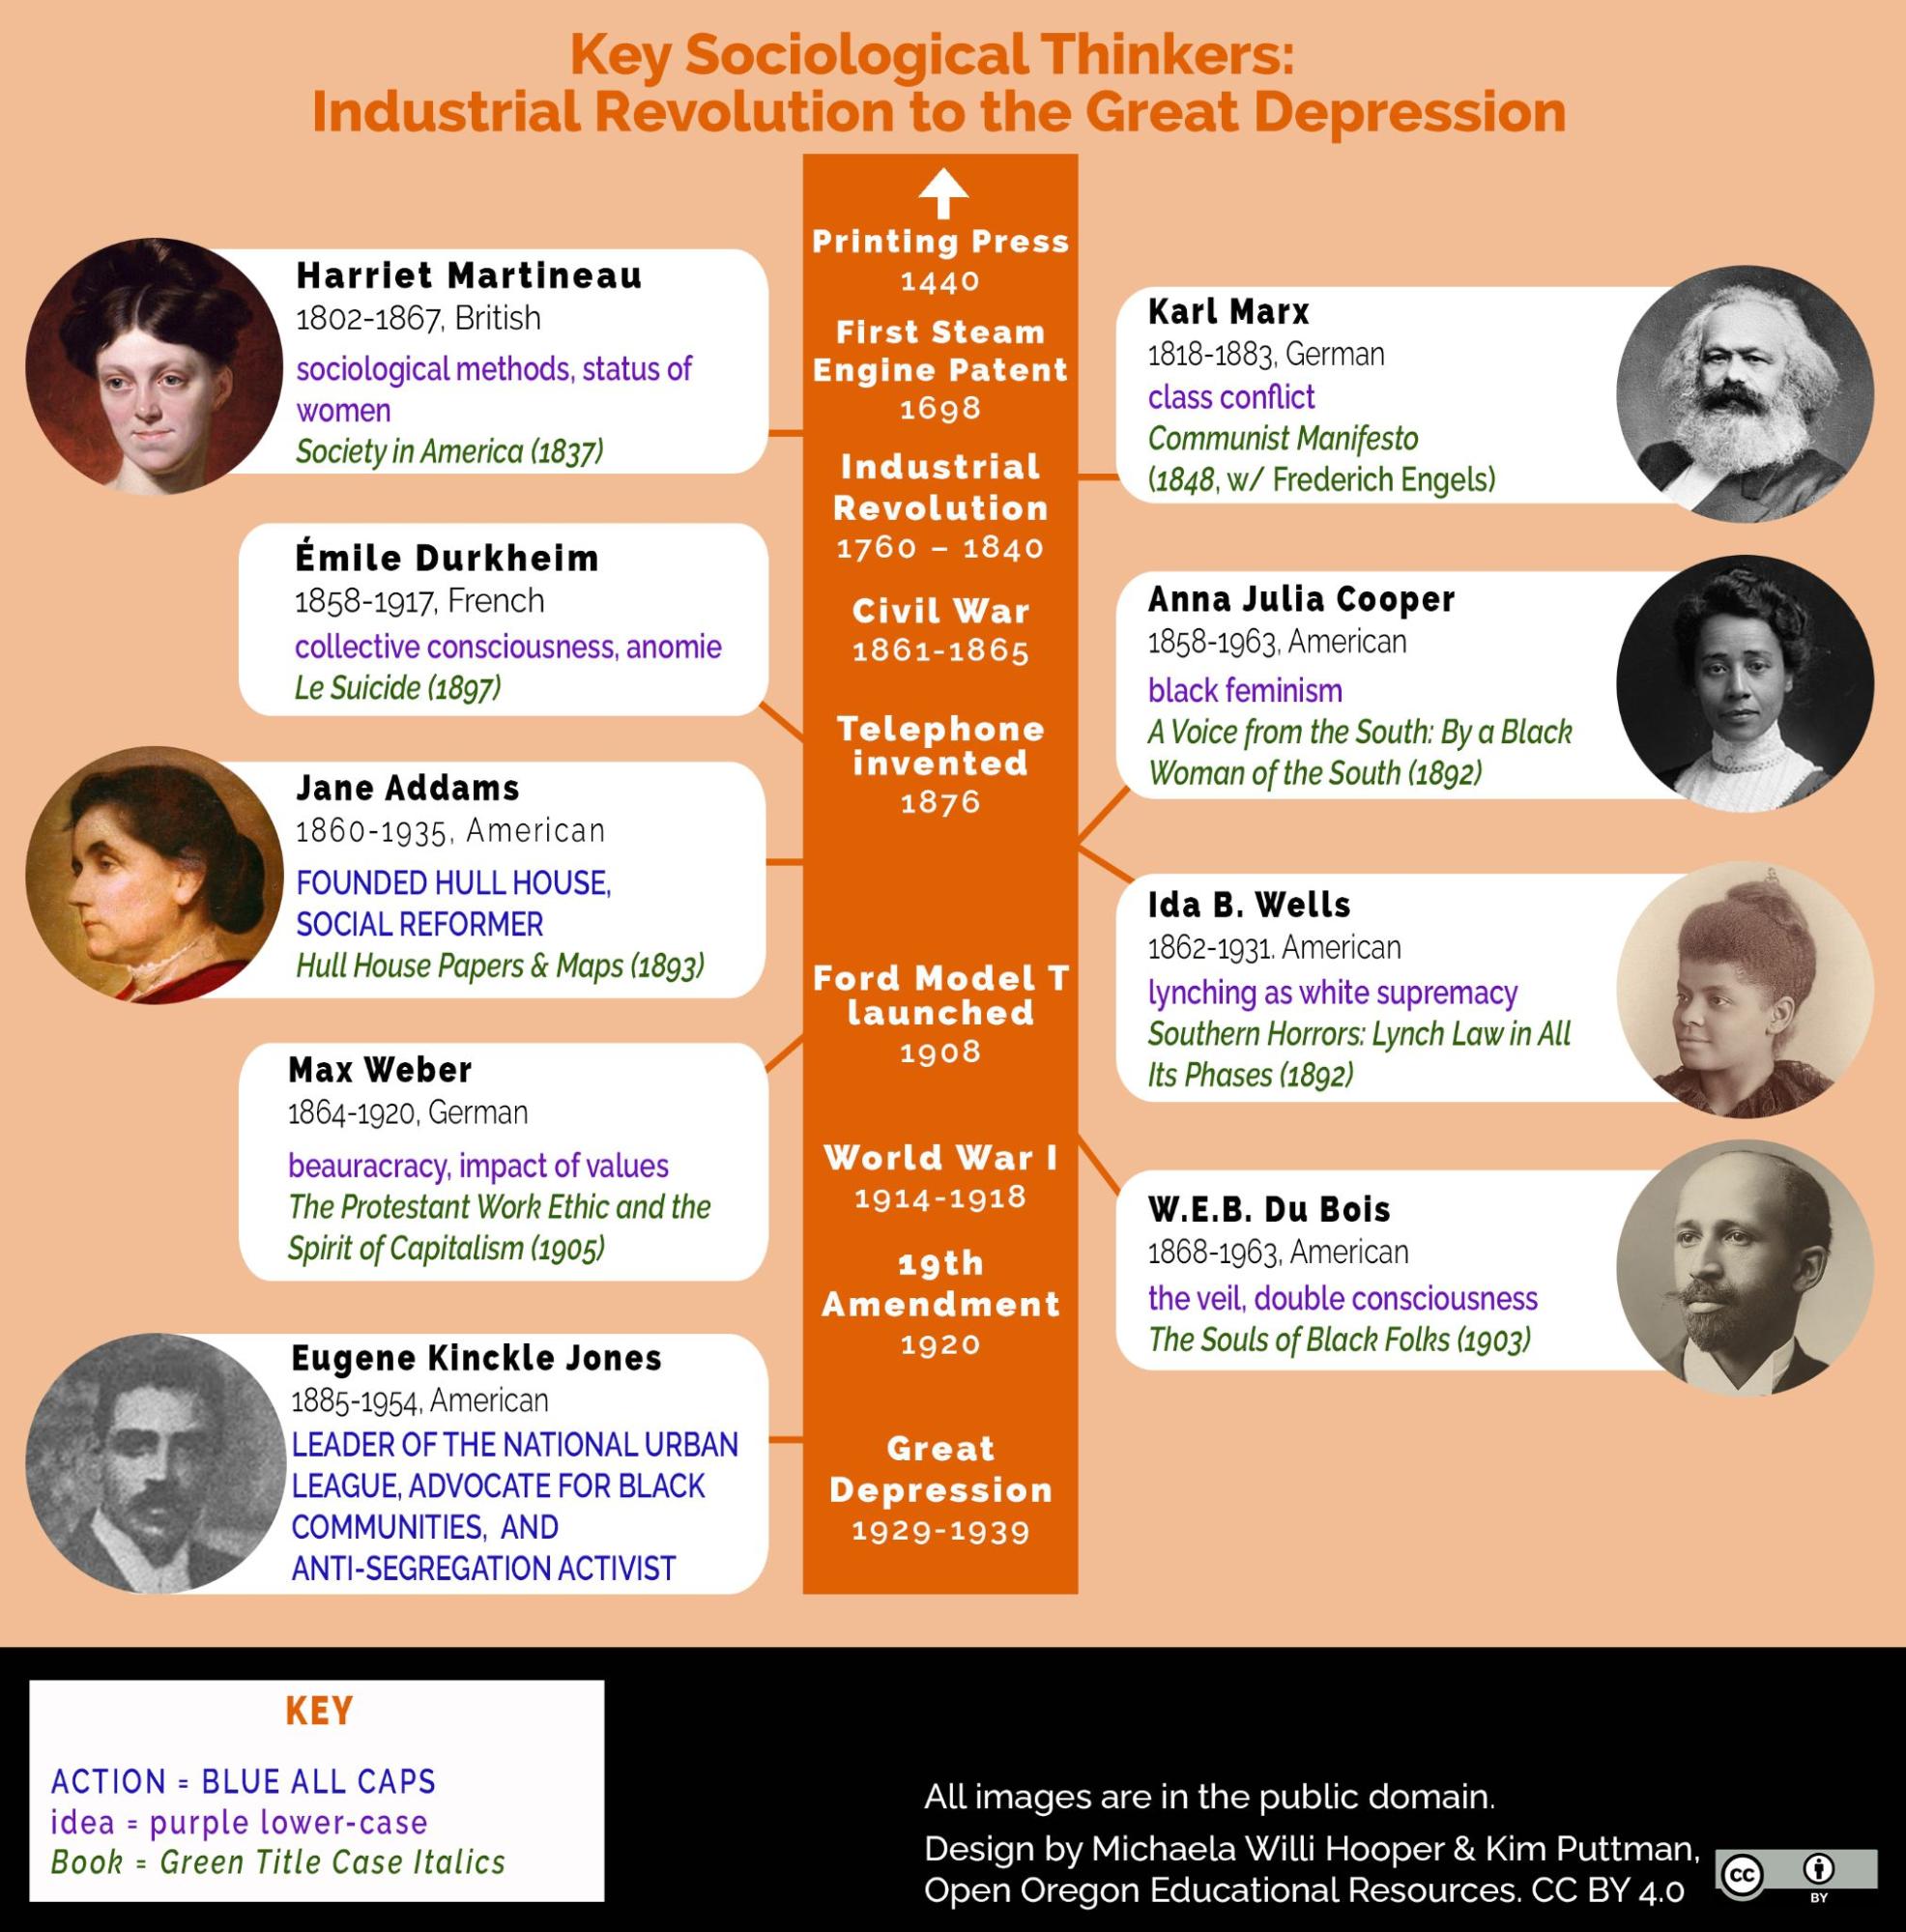 Sociological thinkers timeline through the Great Depression. Image description available.